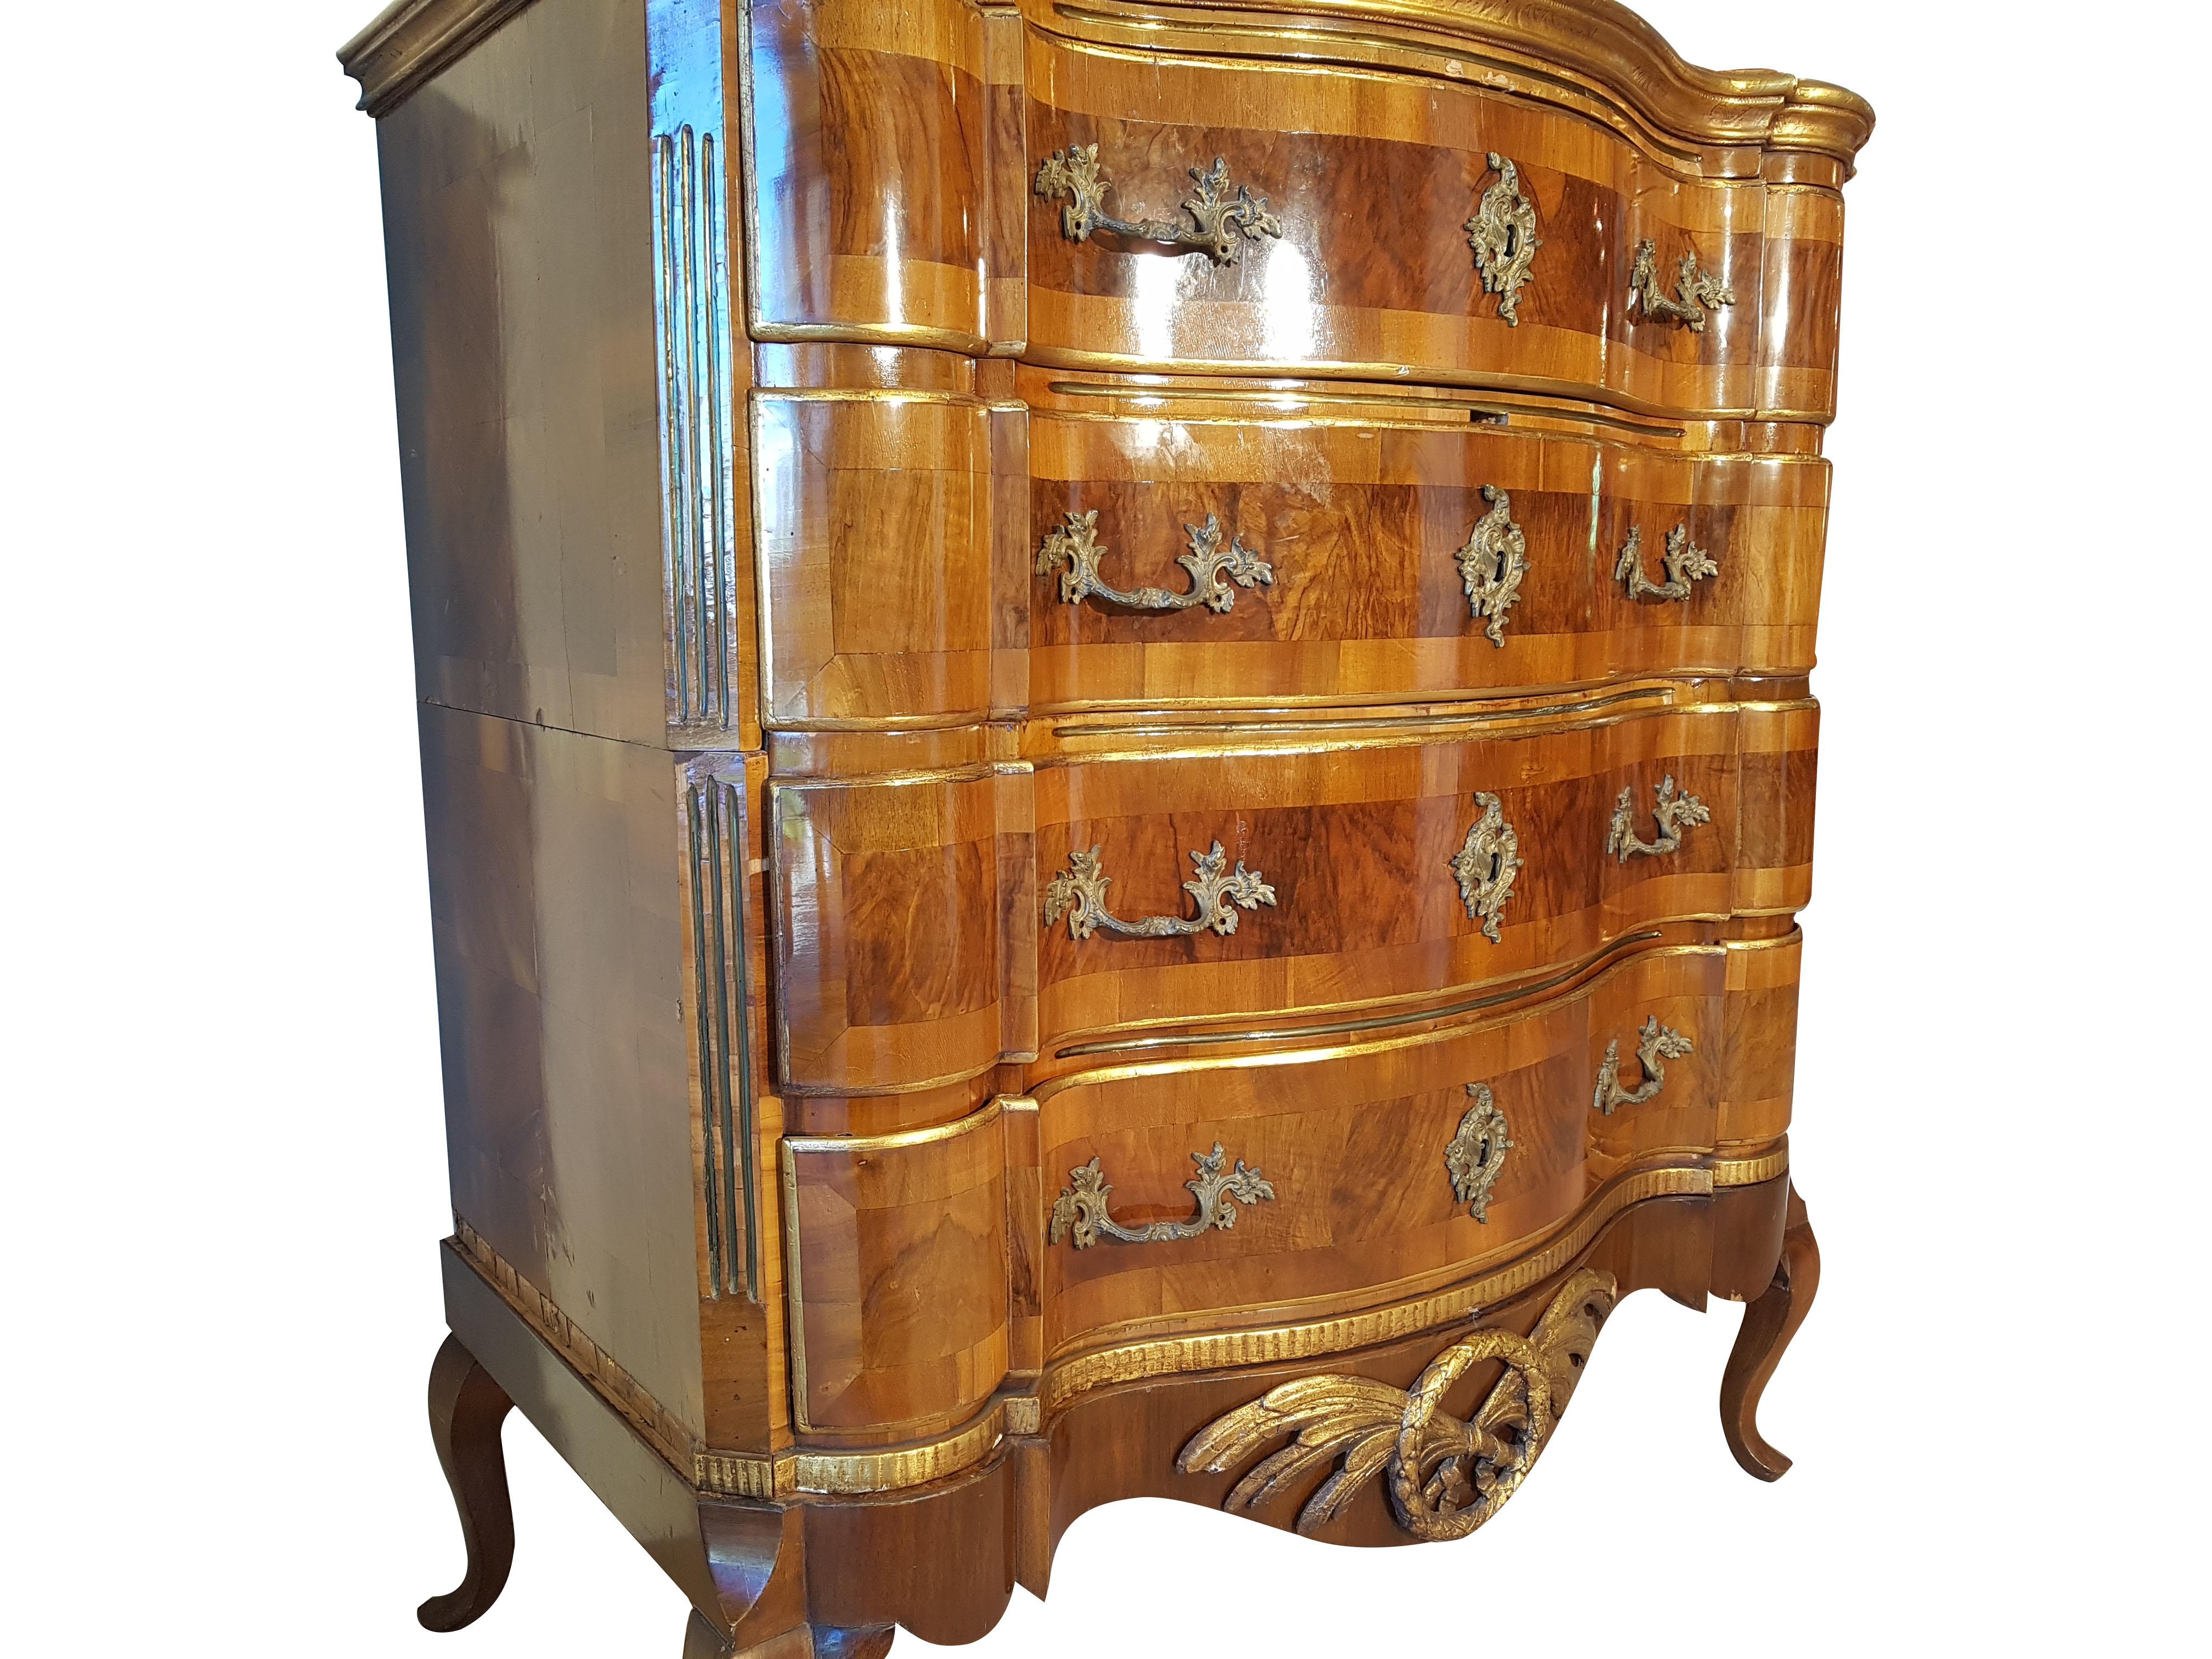 This beautiful and rare courtly commode from the Rococo period - handles and key cartridges made of bronze - is carefully and thoroughly restored - preserving the patina - and polished by hand with shellac. Four big drawers make up a great storage